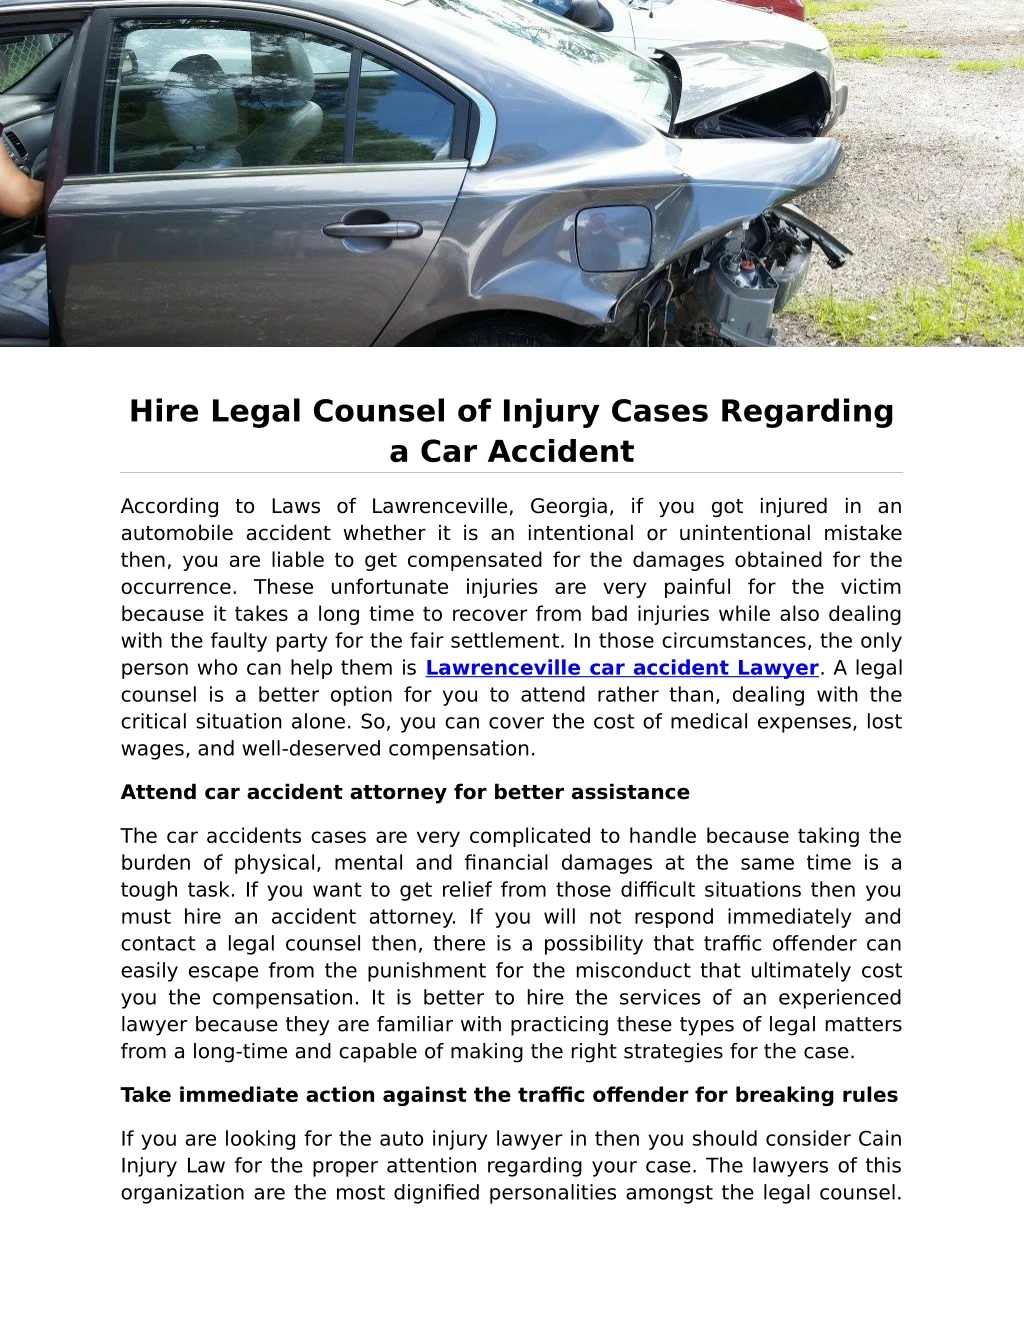 hire legal counsel of injury cases regarding